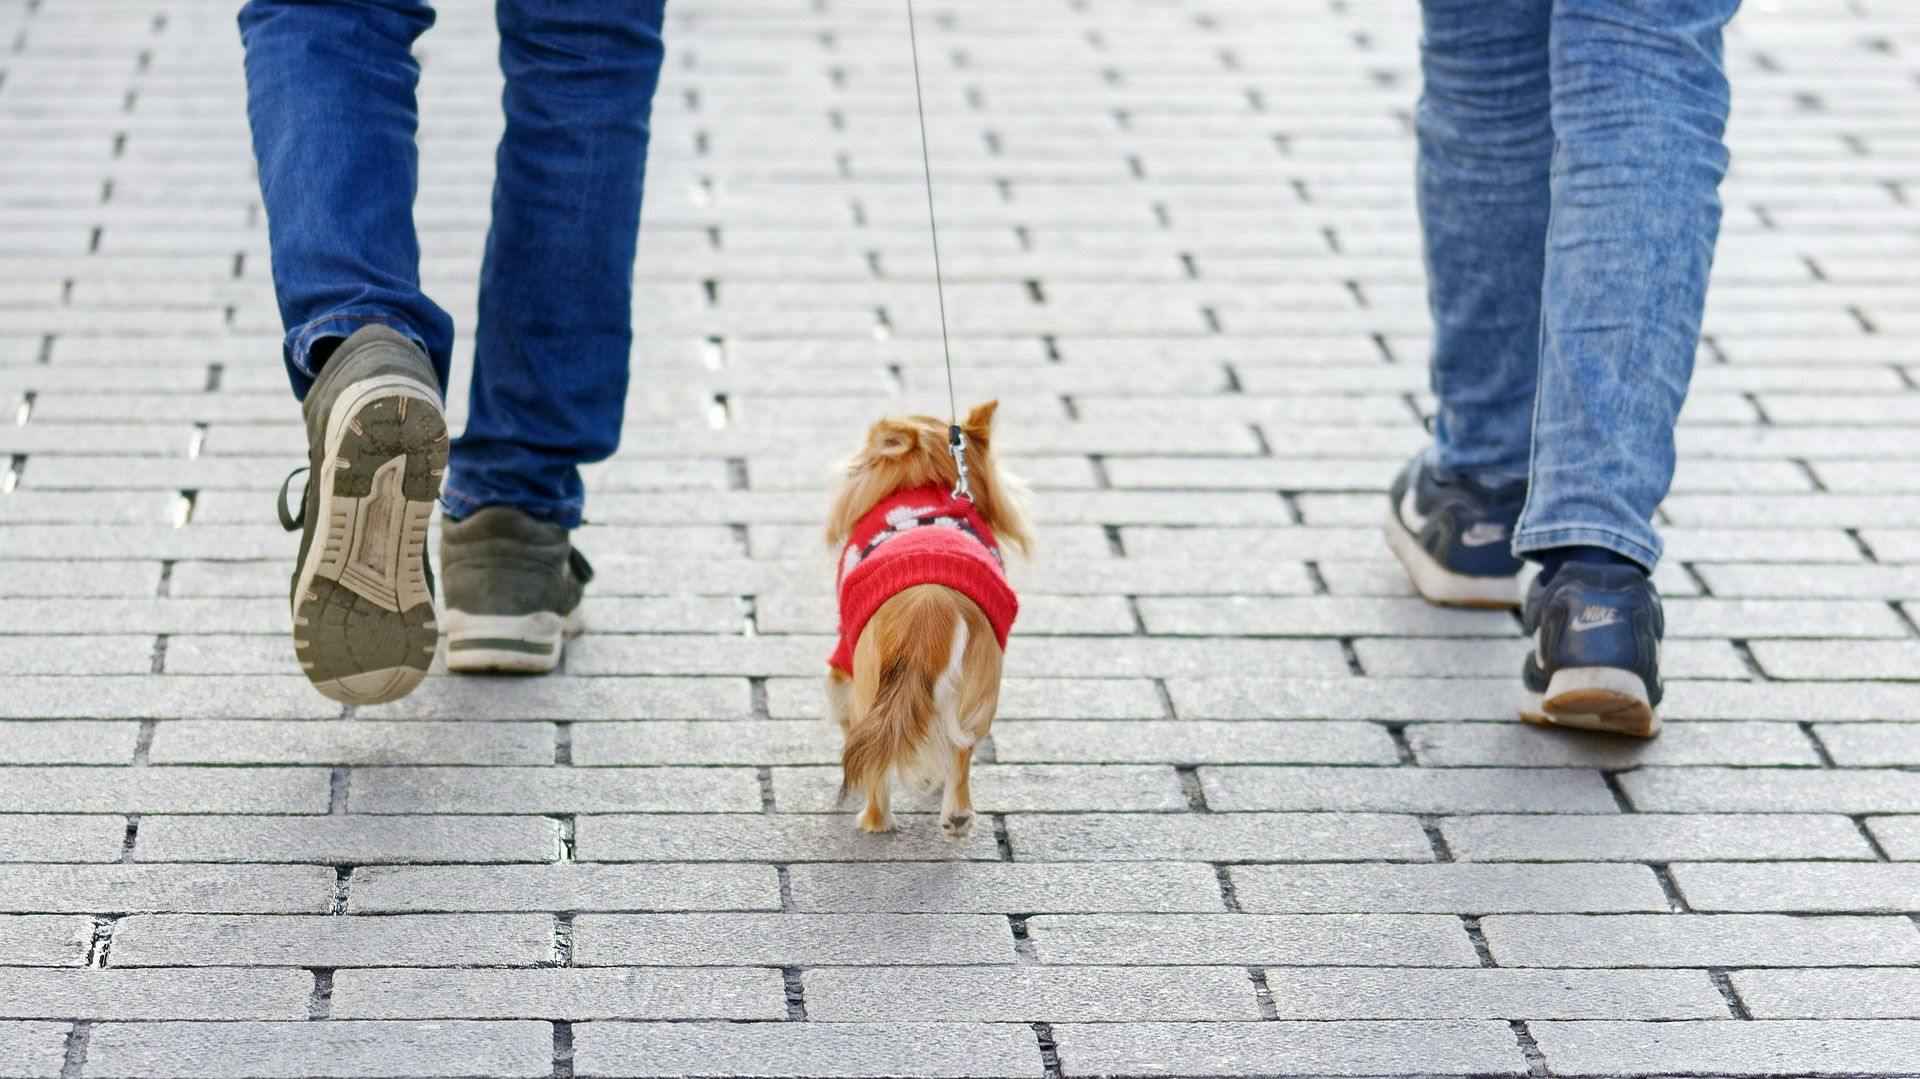 a small dog wearing a red vest being walked by two people